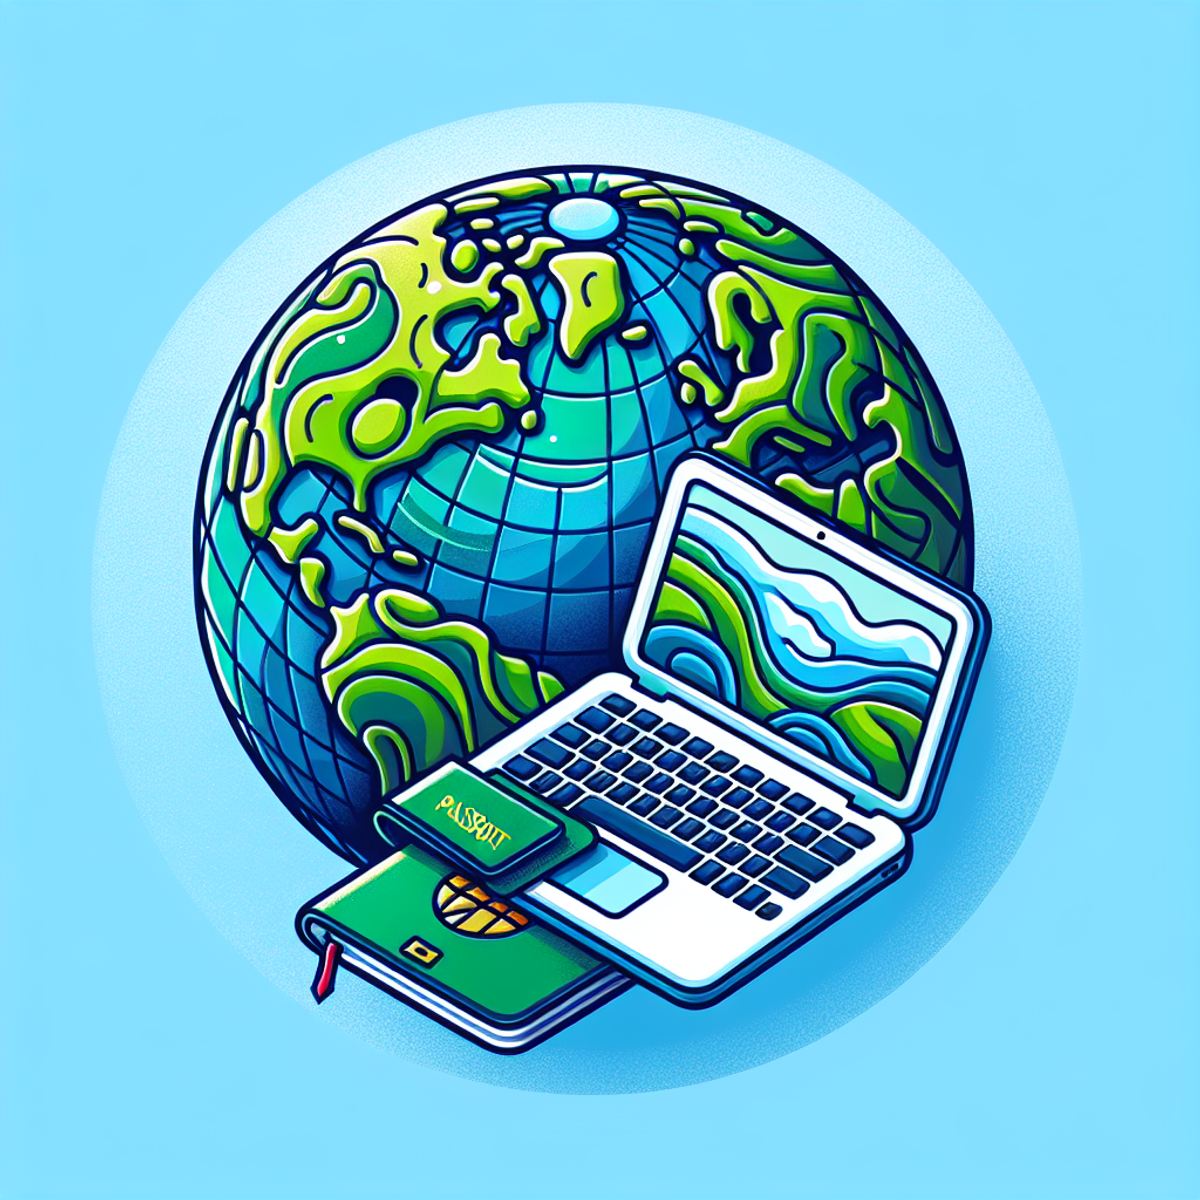 A globe with a passport and a laptop on it, expressing perpetual travel and digital nomad lifestyle. The globe is filled with lush greens and deep blues, the passport is open with blank pages, and the laptop displays a picturesque, non text-based screen saver.